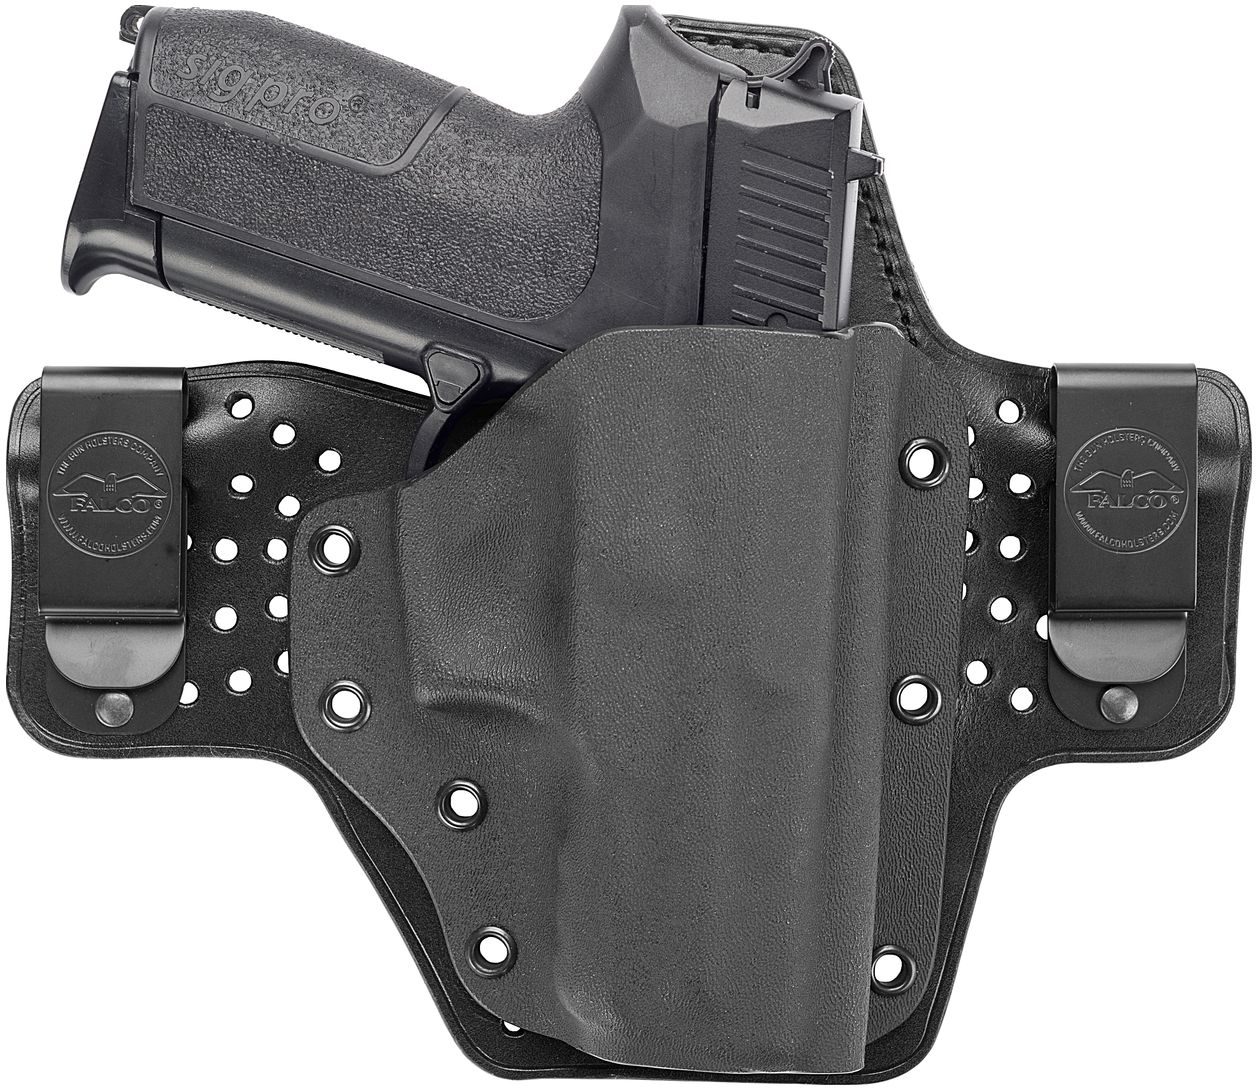 12 Things to Consider When Choosing a Concealed Carry Holster